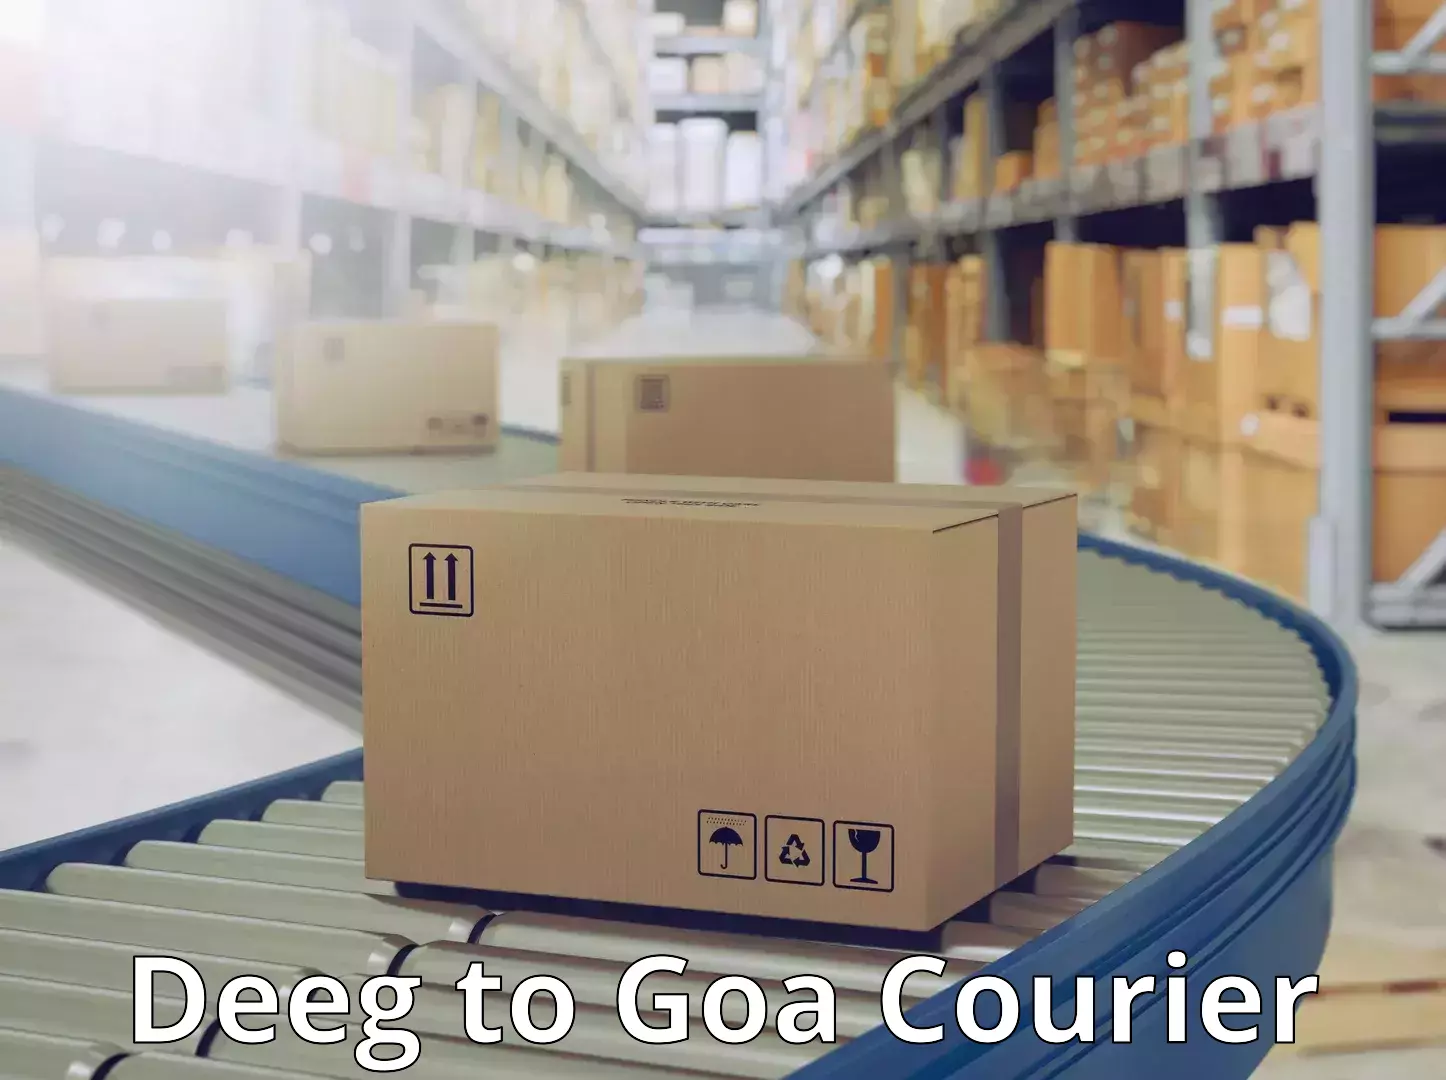 Nationwide delivery network in Deeg to Goa